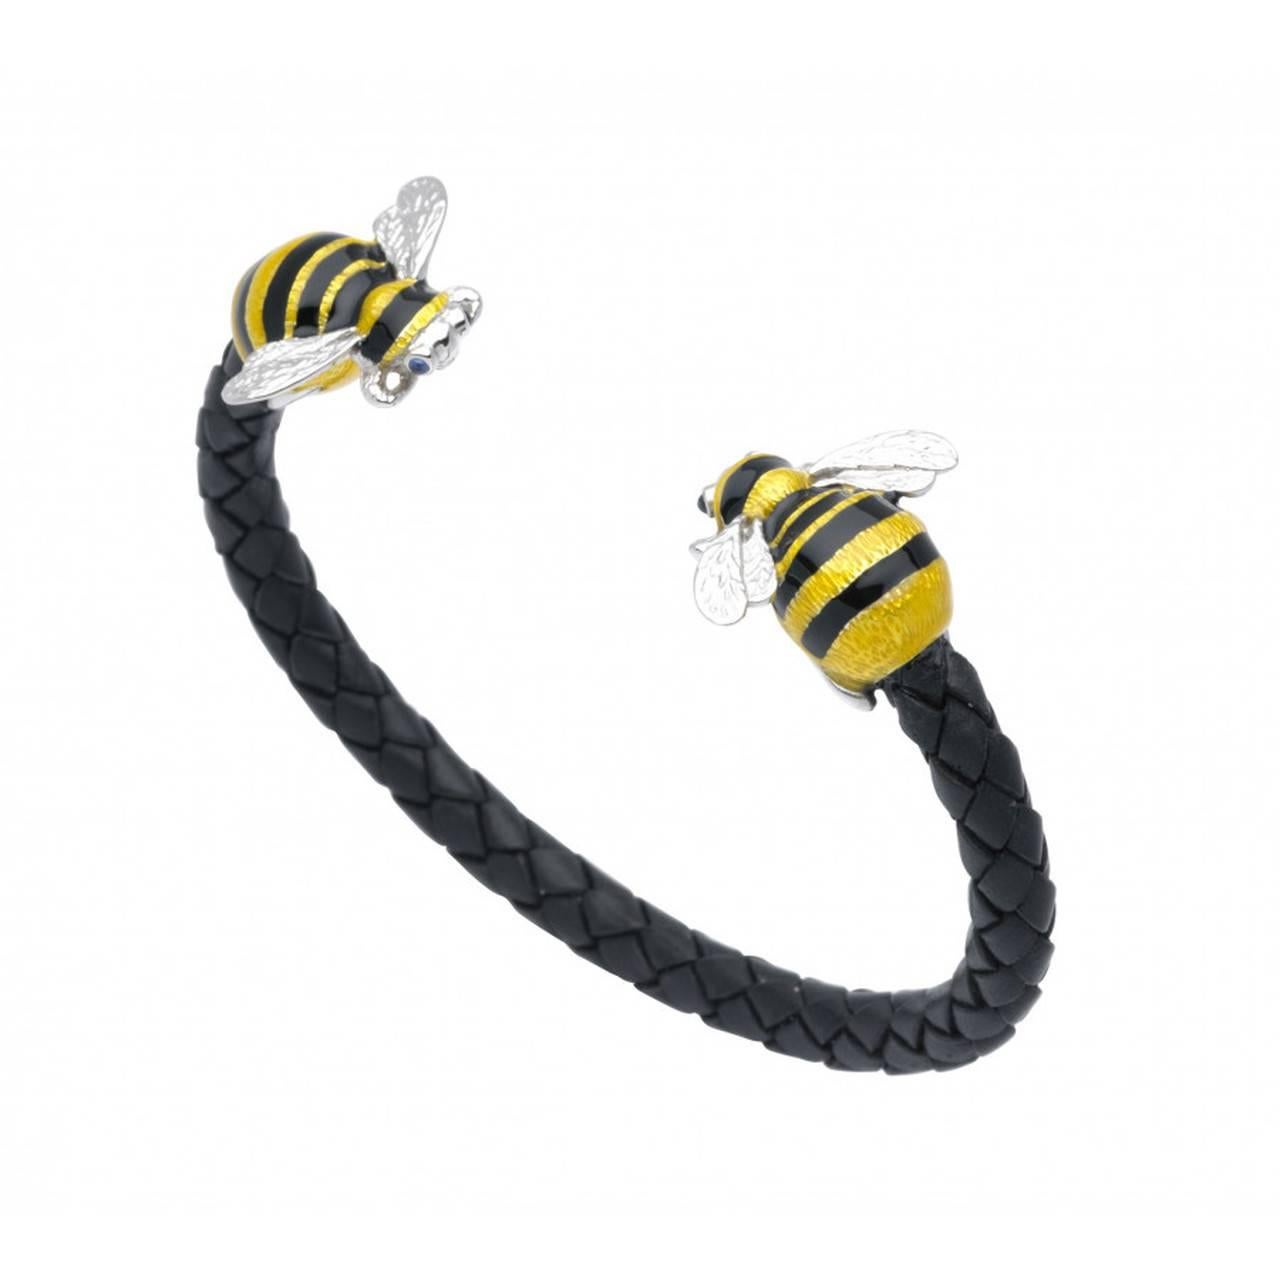 

Bees buzzing in the garden, in the city, busy making honey, busy making money

Our busy bee bangle is the perfect accessory with a slick navy suit. Show your stripes and sport a sign of industrious heritage.

The Deakin & Francis Leather Bumble